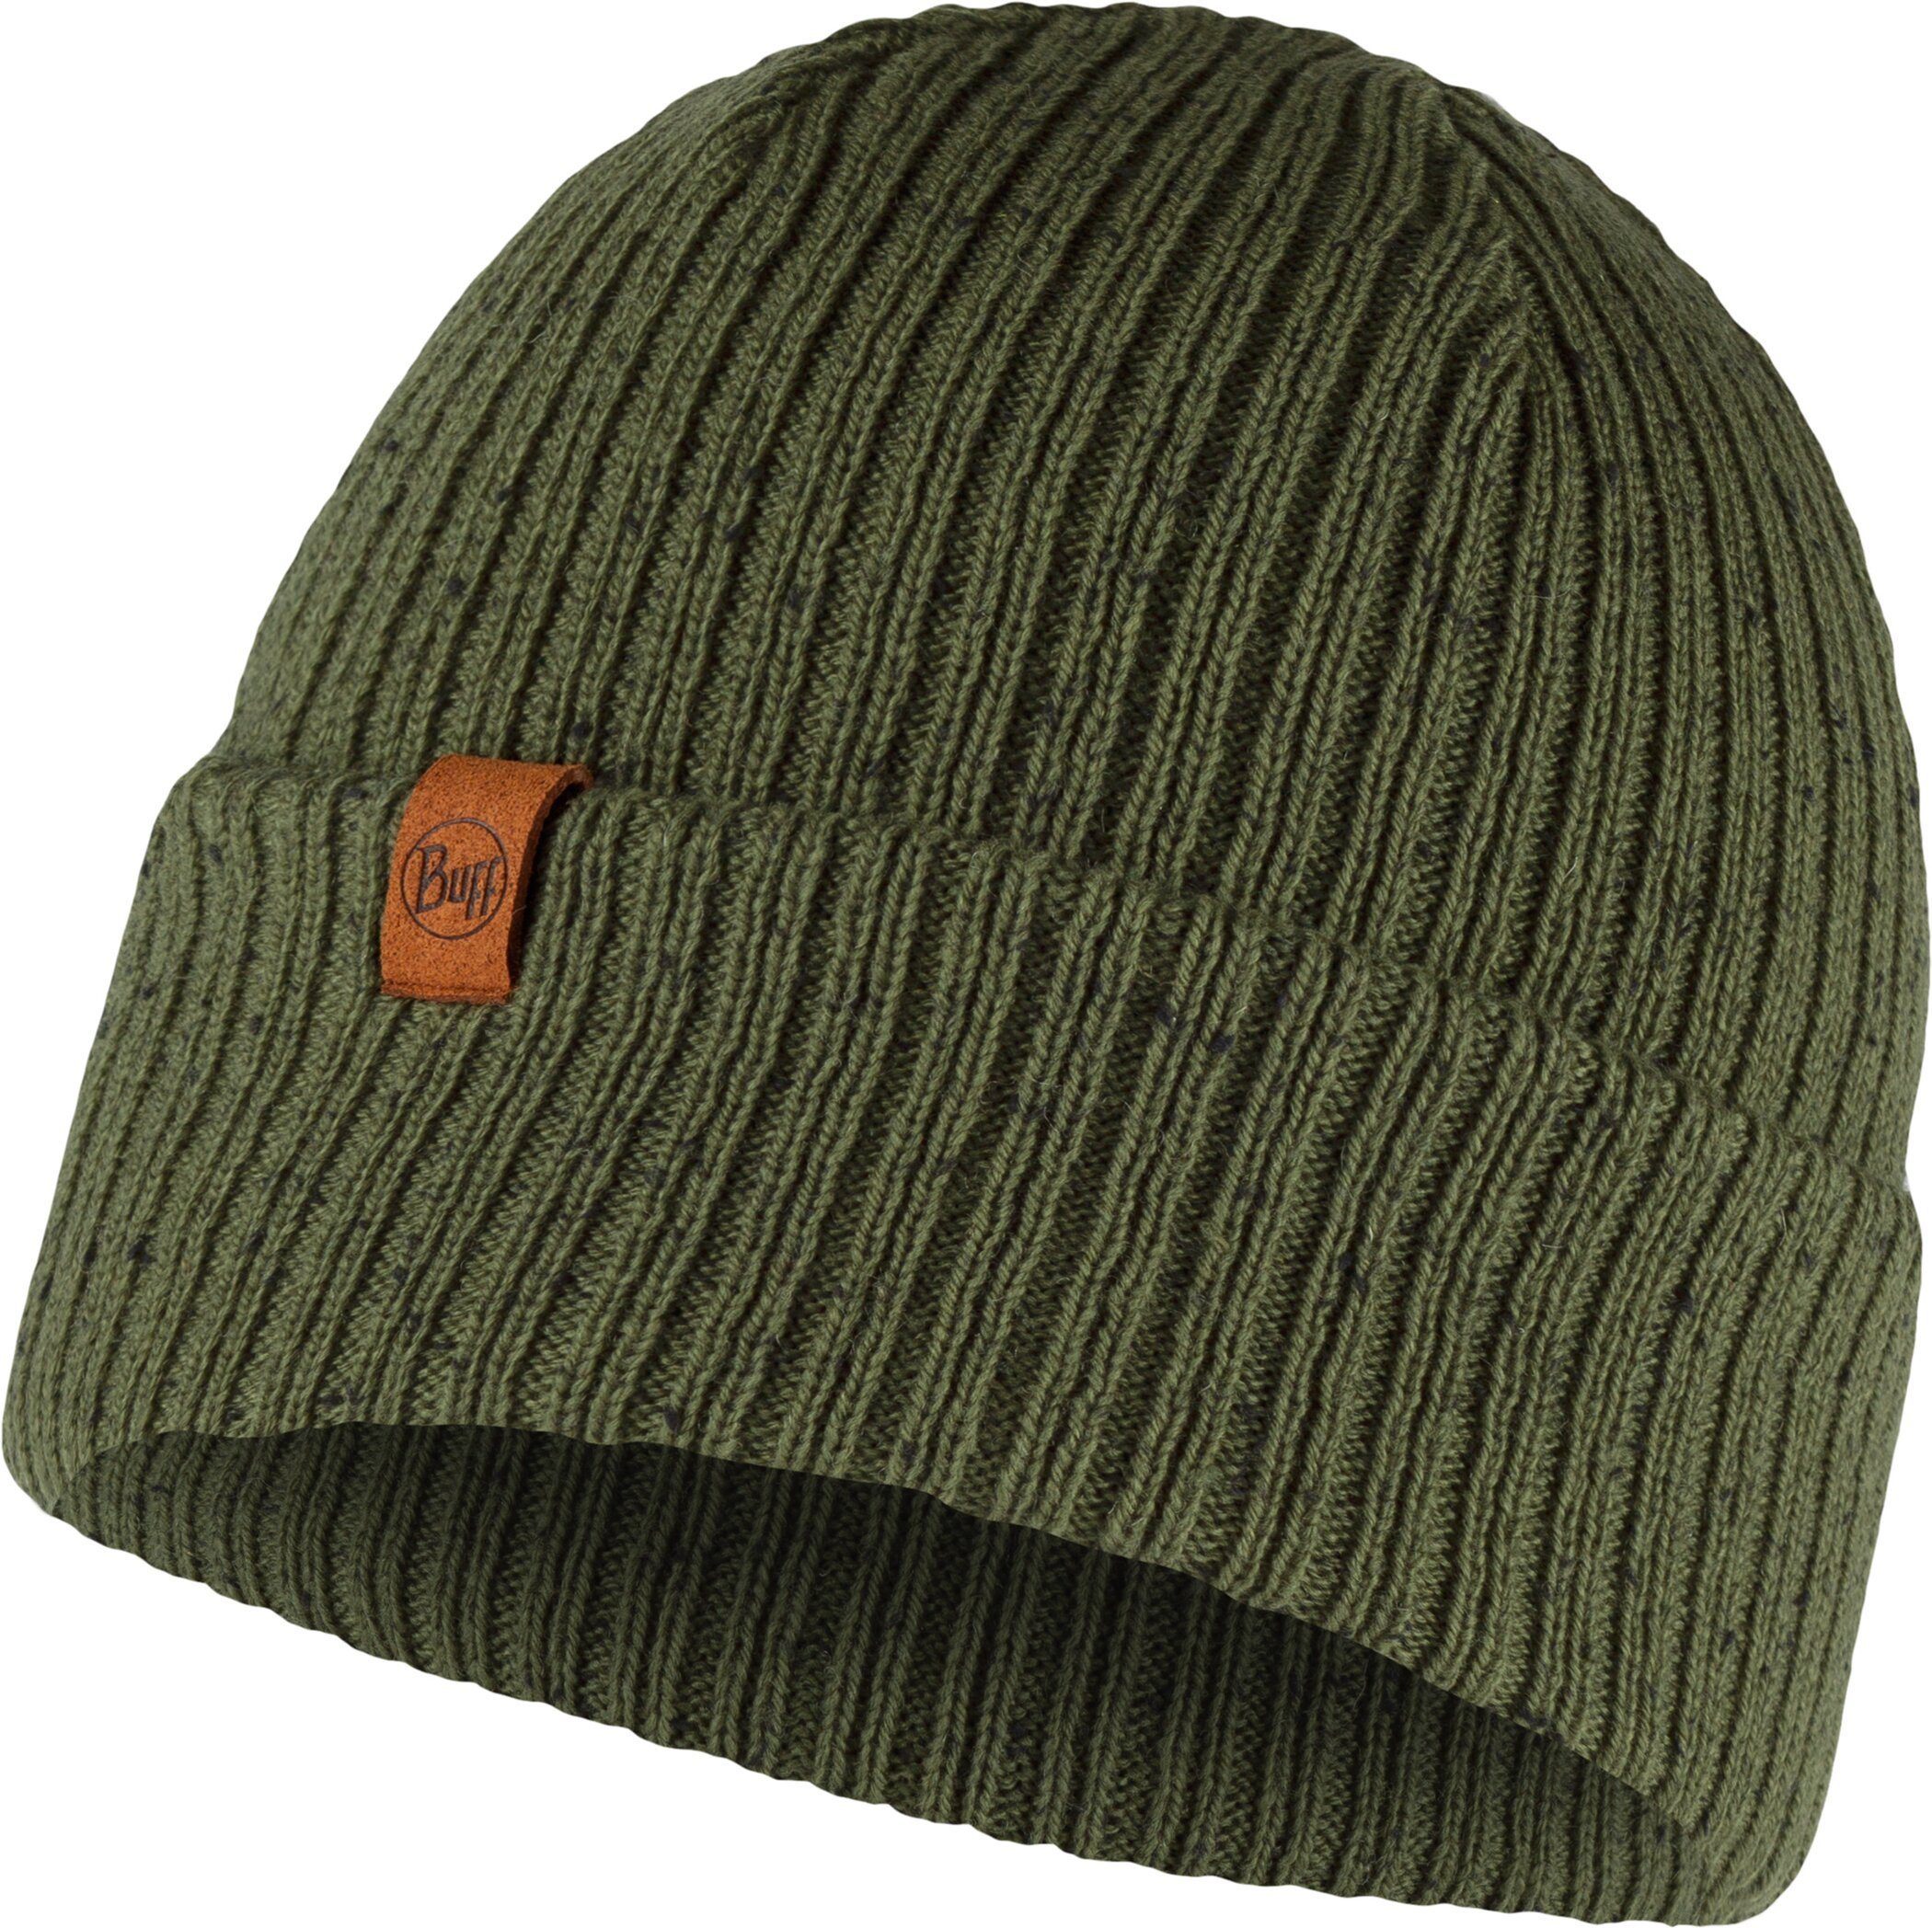 SOLID CAMOUFLAGE Beanie Knitted Beanie Buff